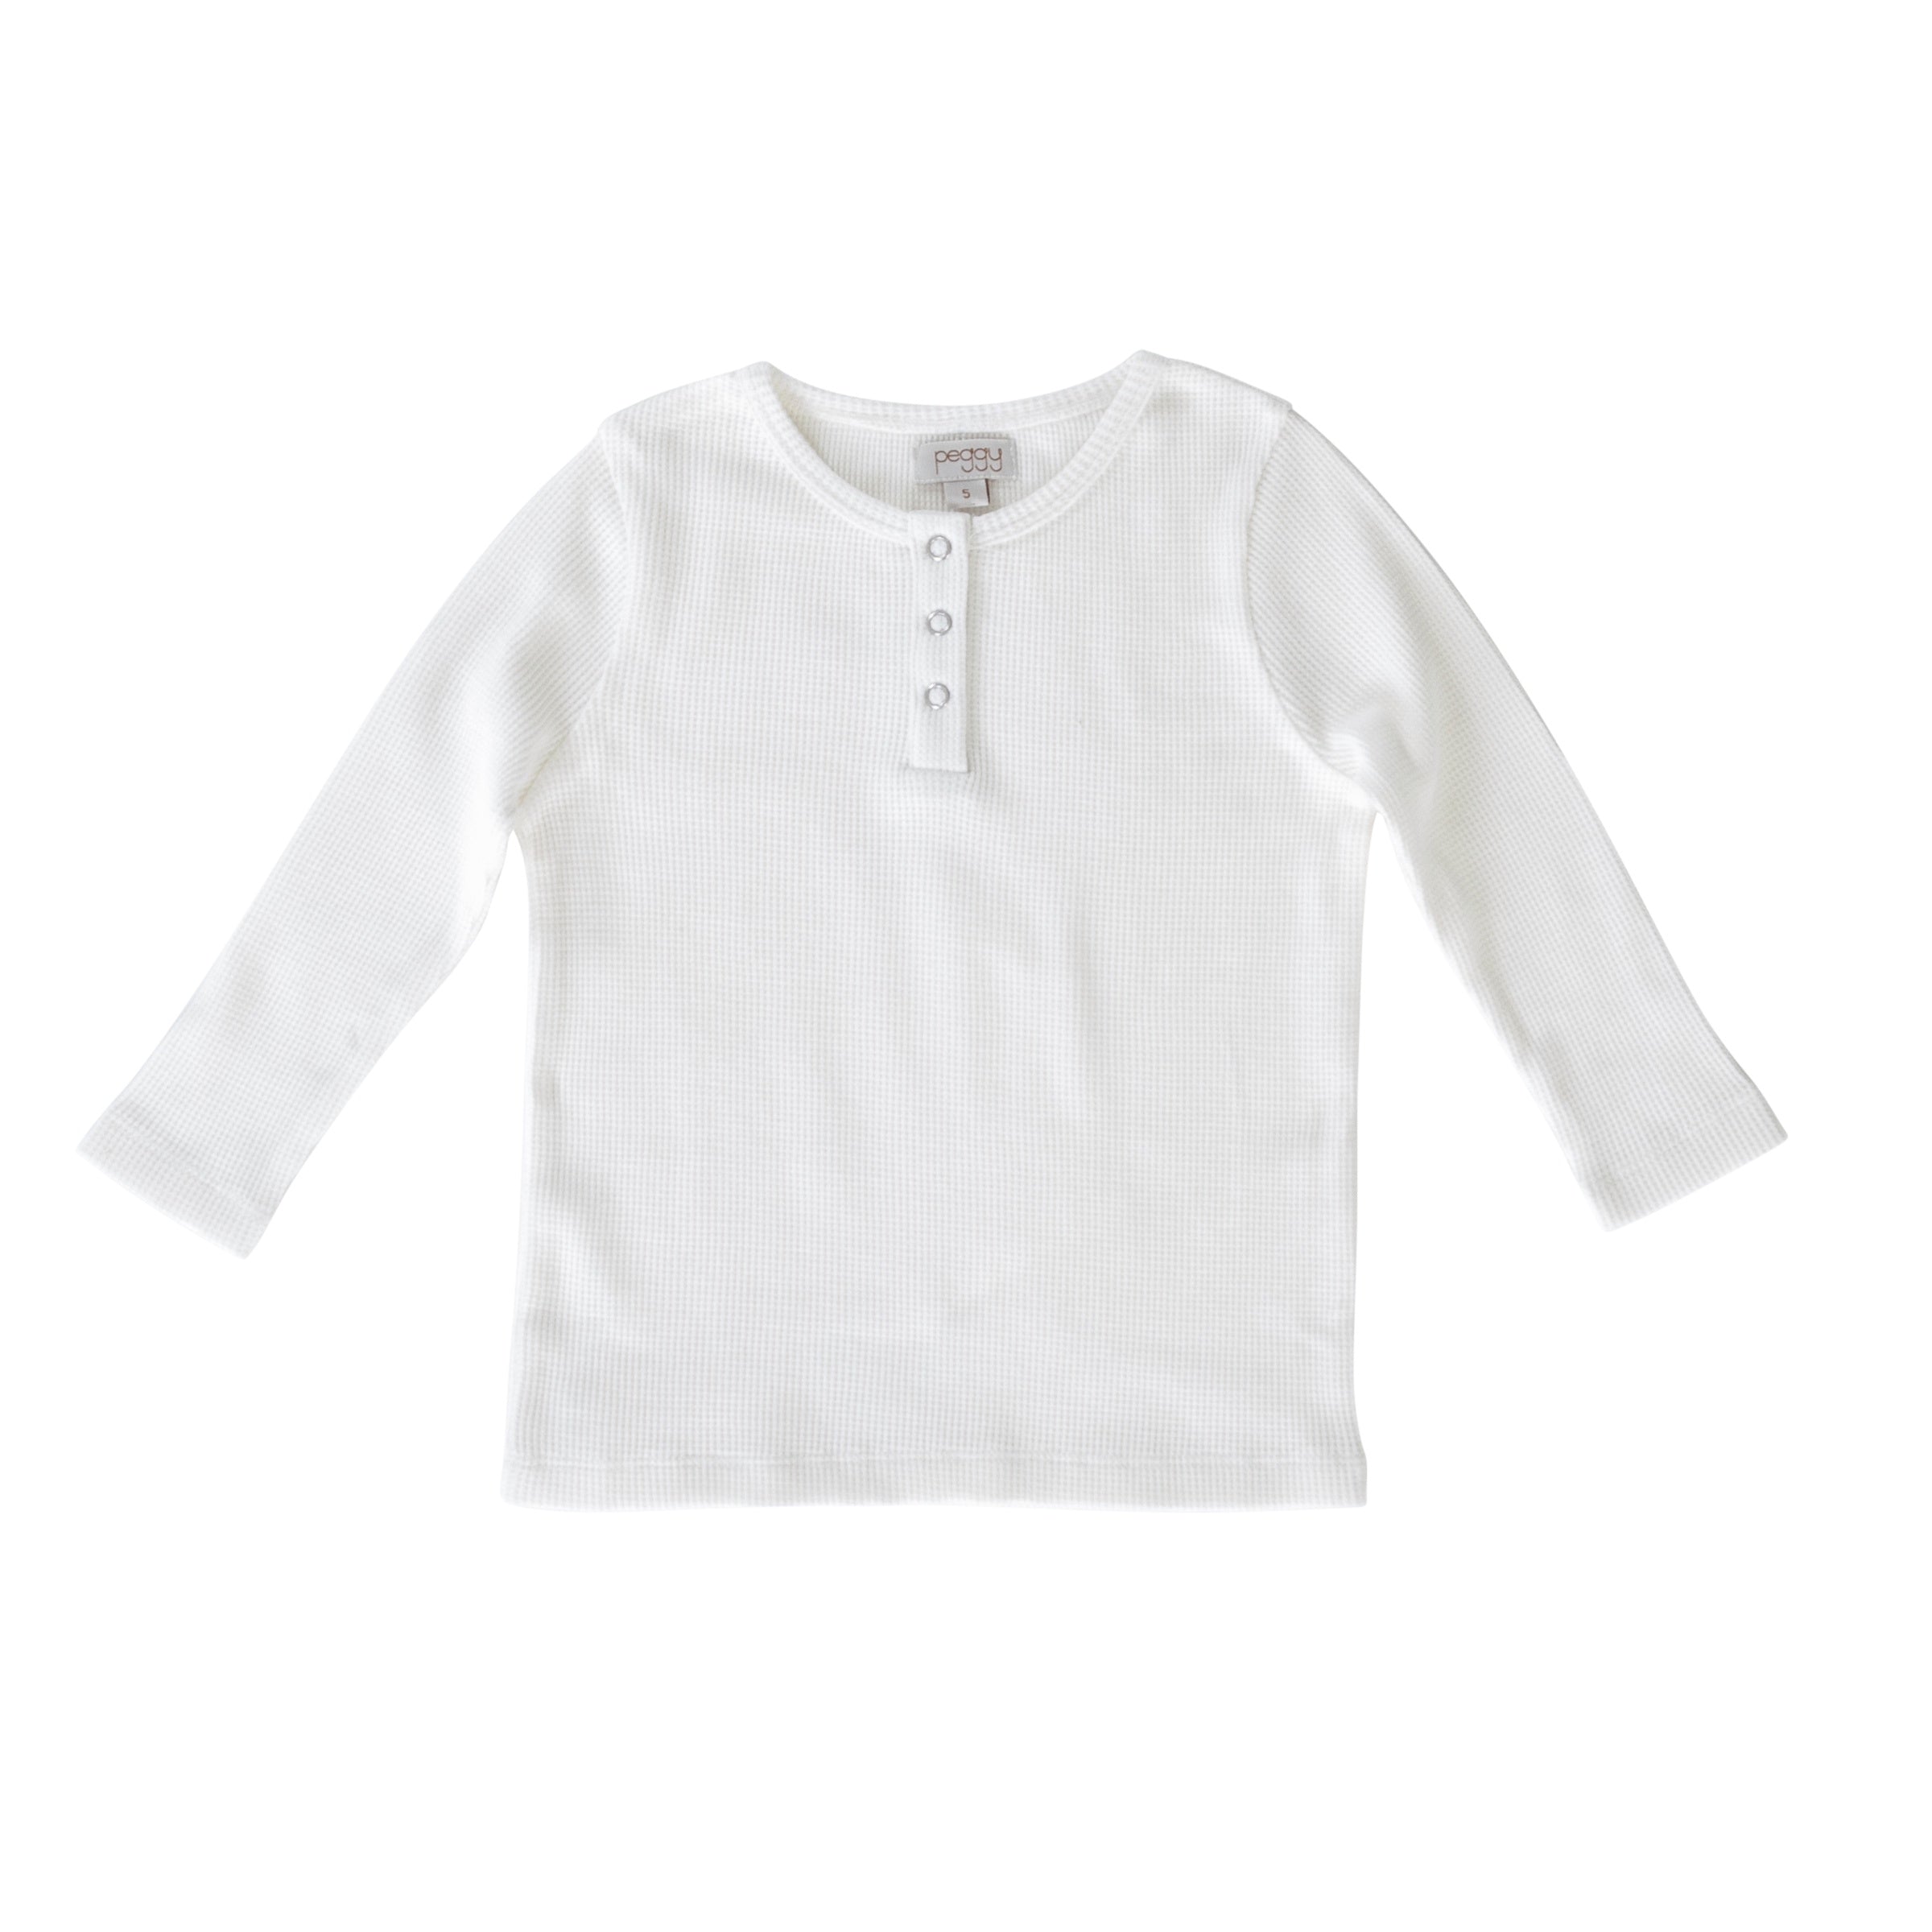 Peggy - Halo Henley Top - White